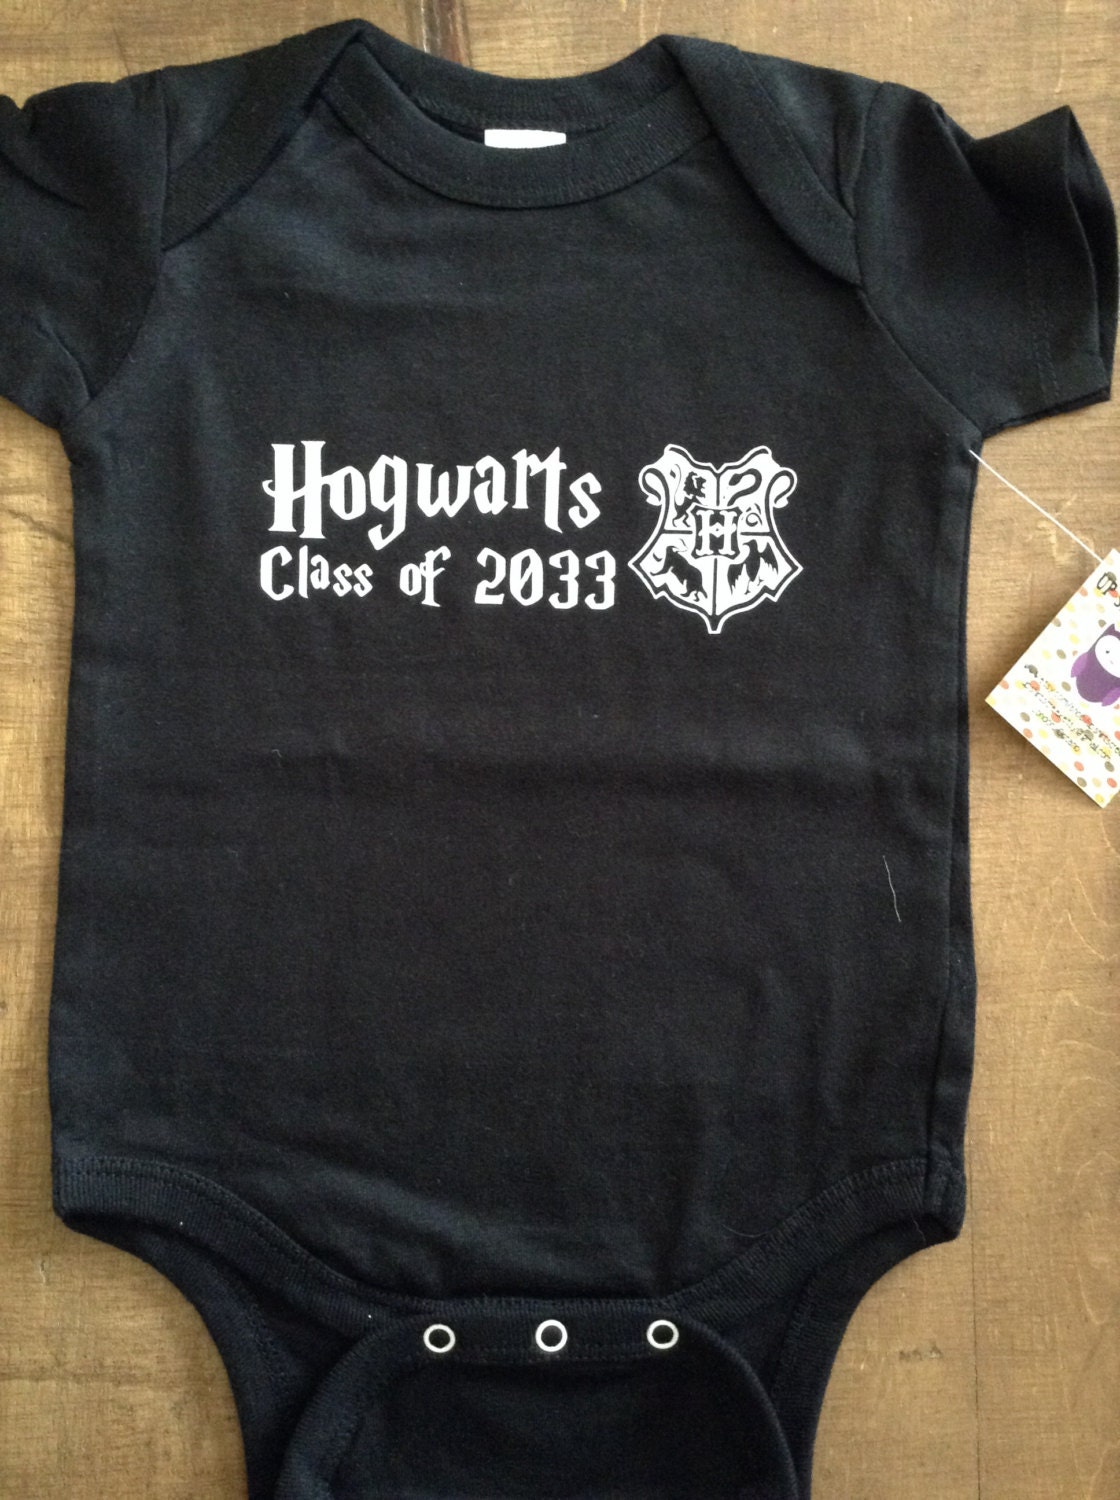 Harry Potter Inspired Hogwarts Class of 20331120 x 1500